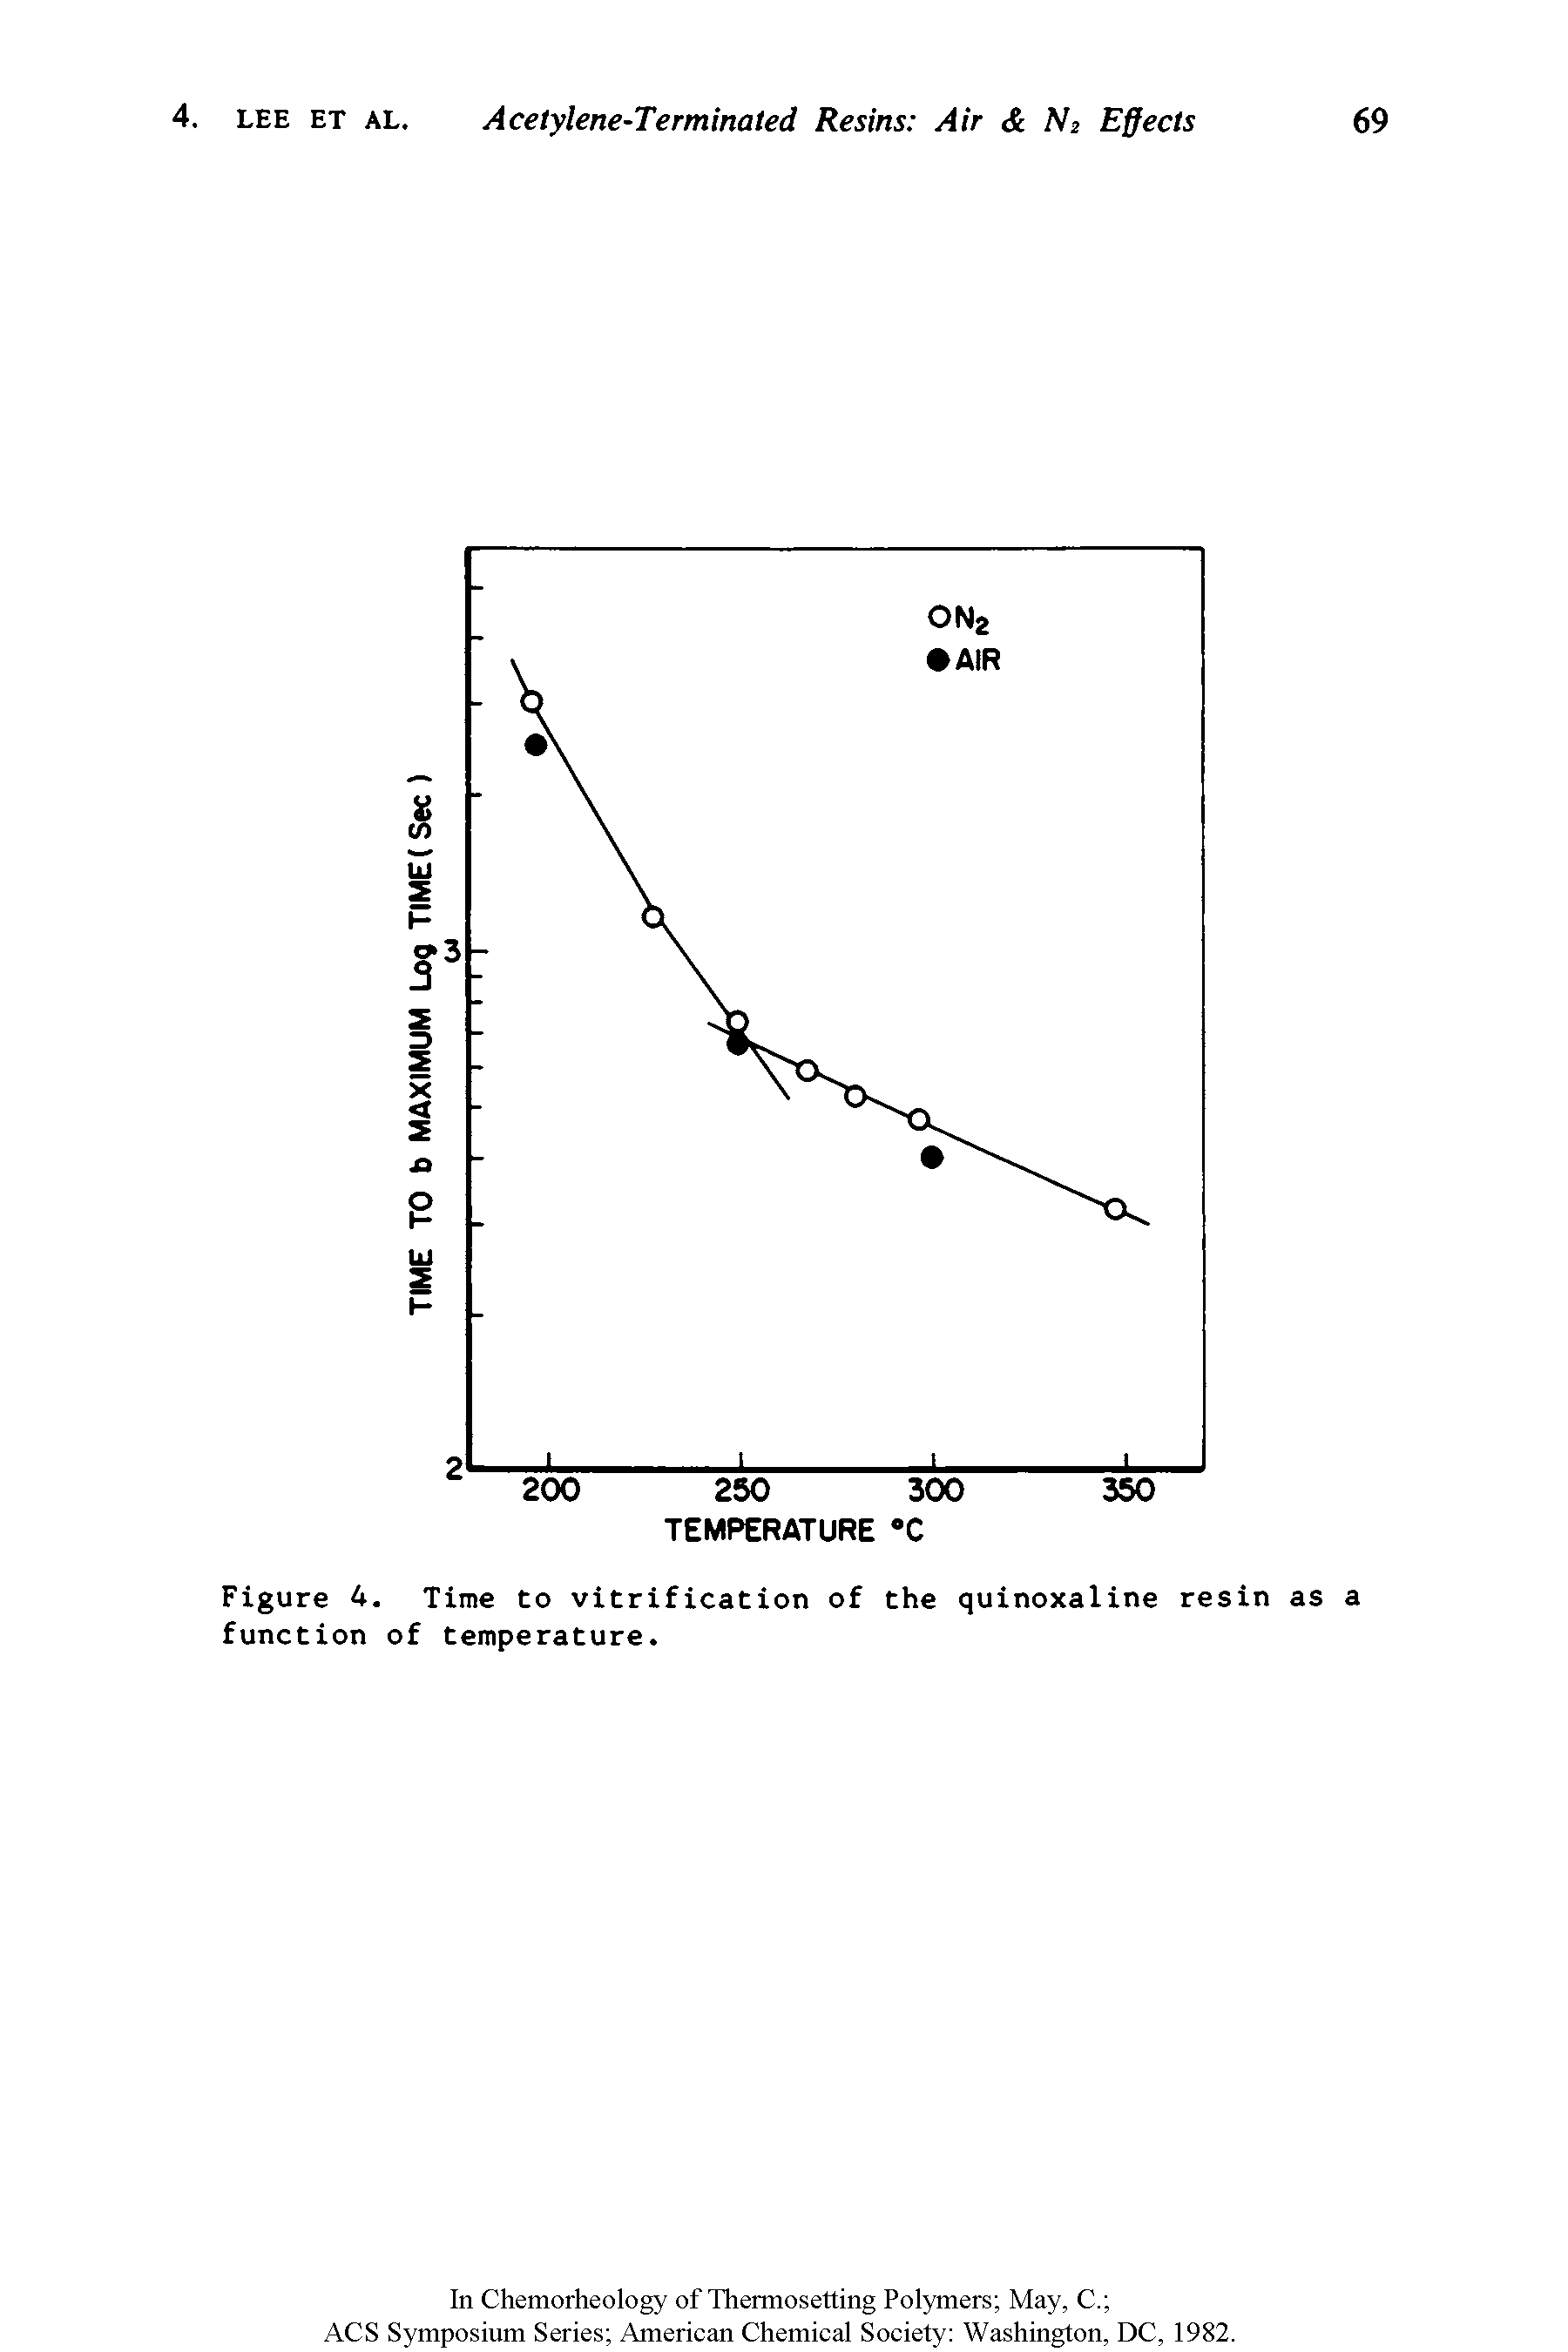 Figure 4. Time to vitrification of the quinoxaline resin as a function of temperature.